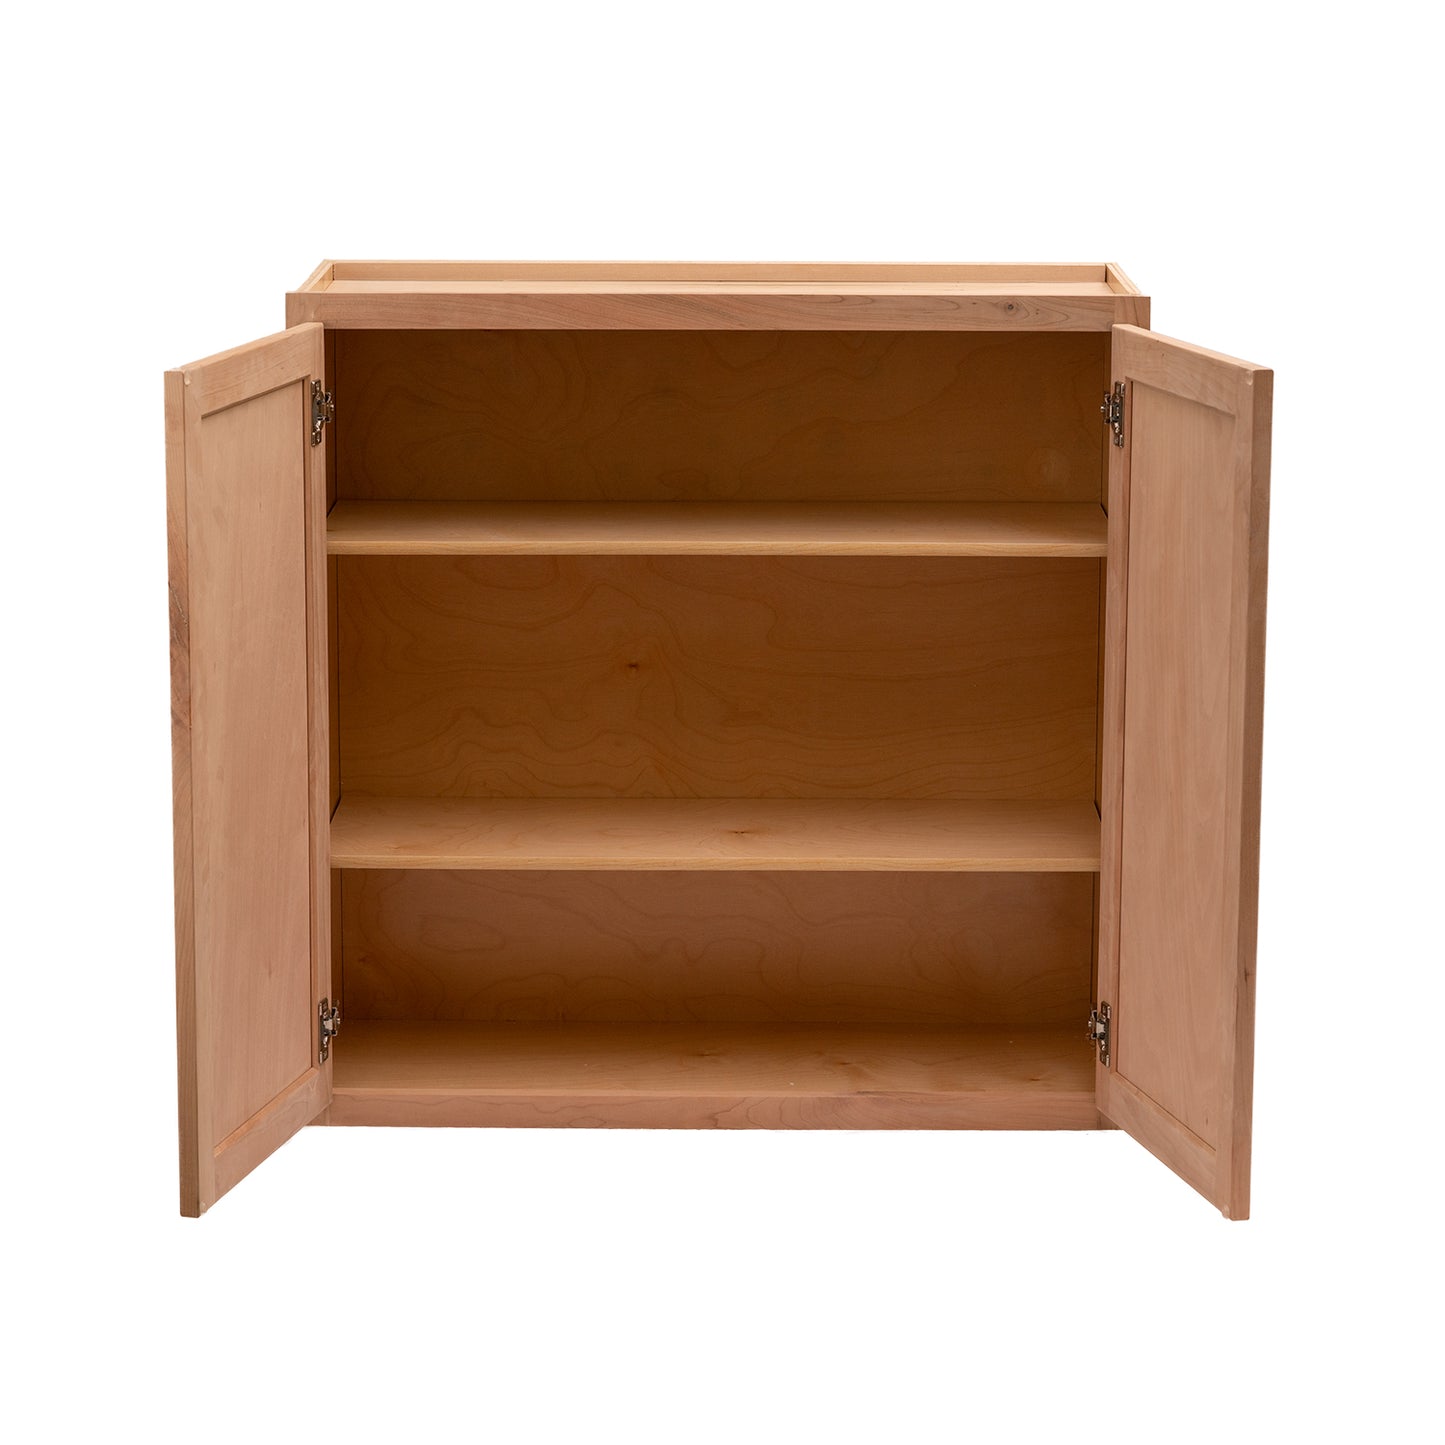 Quicklock RTA (Ready-to-Assemble) Raw Cherry Wall Cabinet- 30